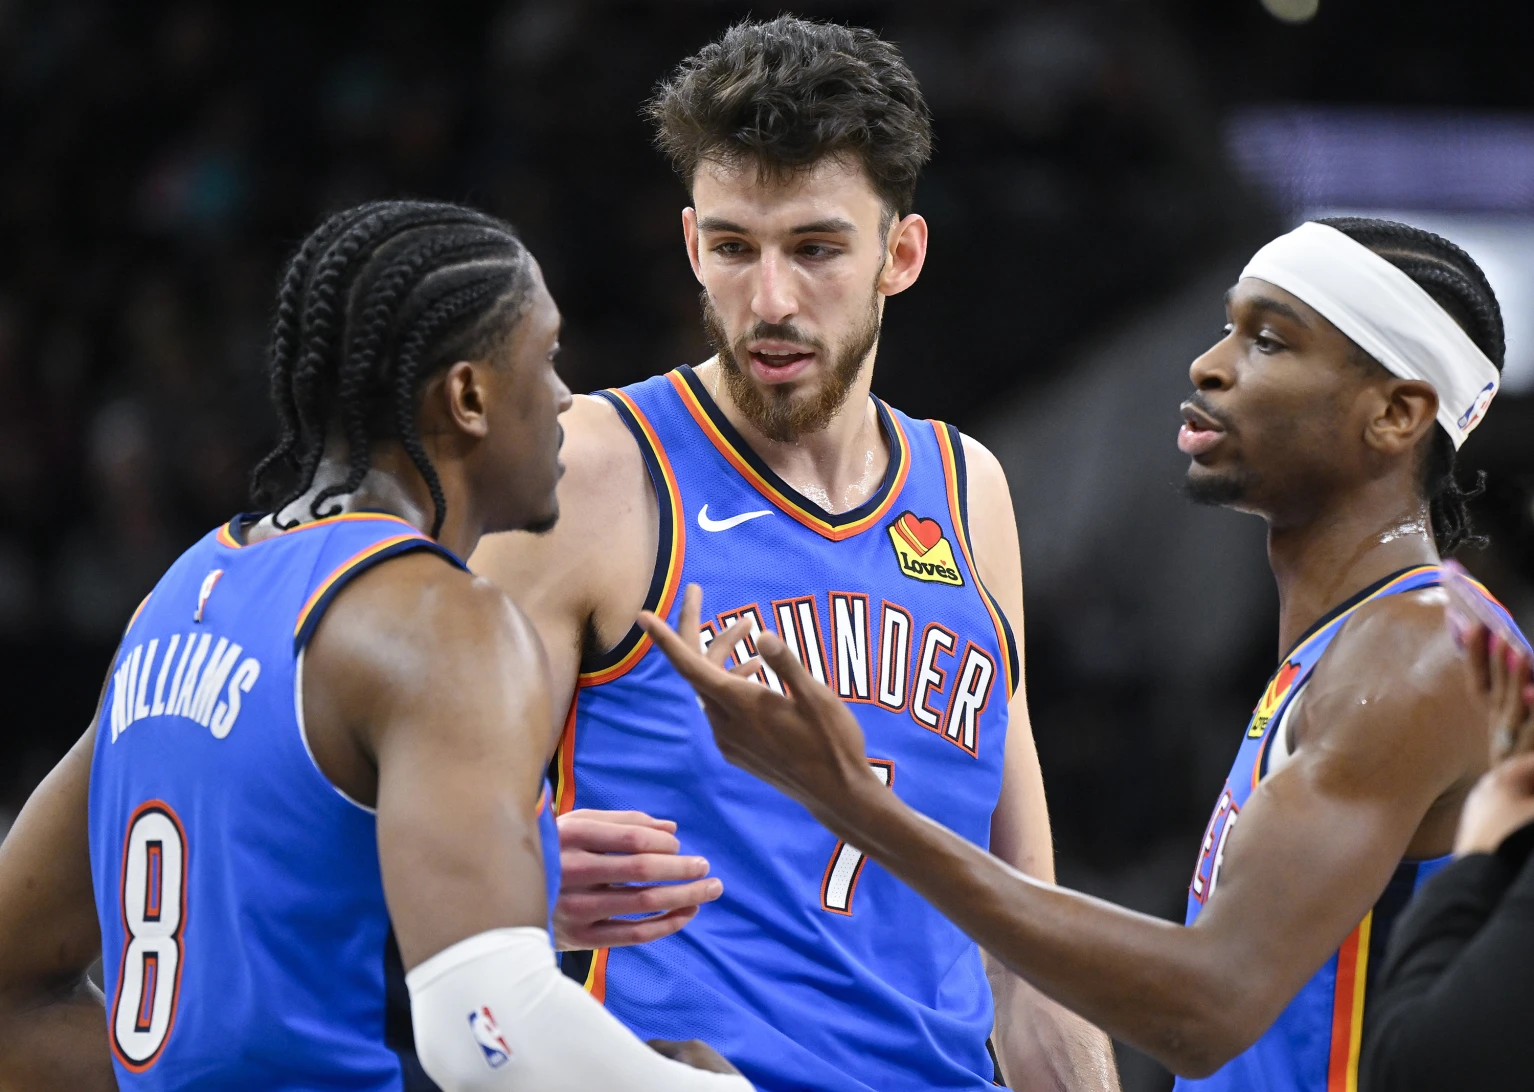 February 29th, 2024; San Antonio, Texas, USA; Oklahoma City Thunder’s Chet Holmgren, Jalen Williams, and Shai Gilgeous-Alexander strategize at center court during a game against the Spurs at Frost Bank Center. Mandatory Credit: Darren Abate-AP Photos